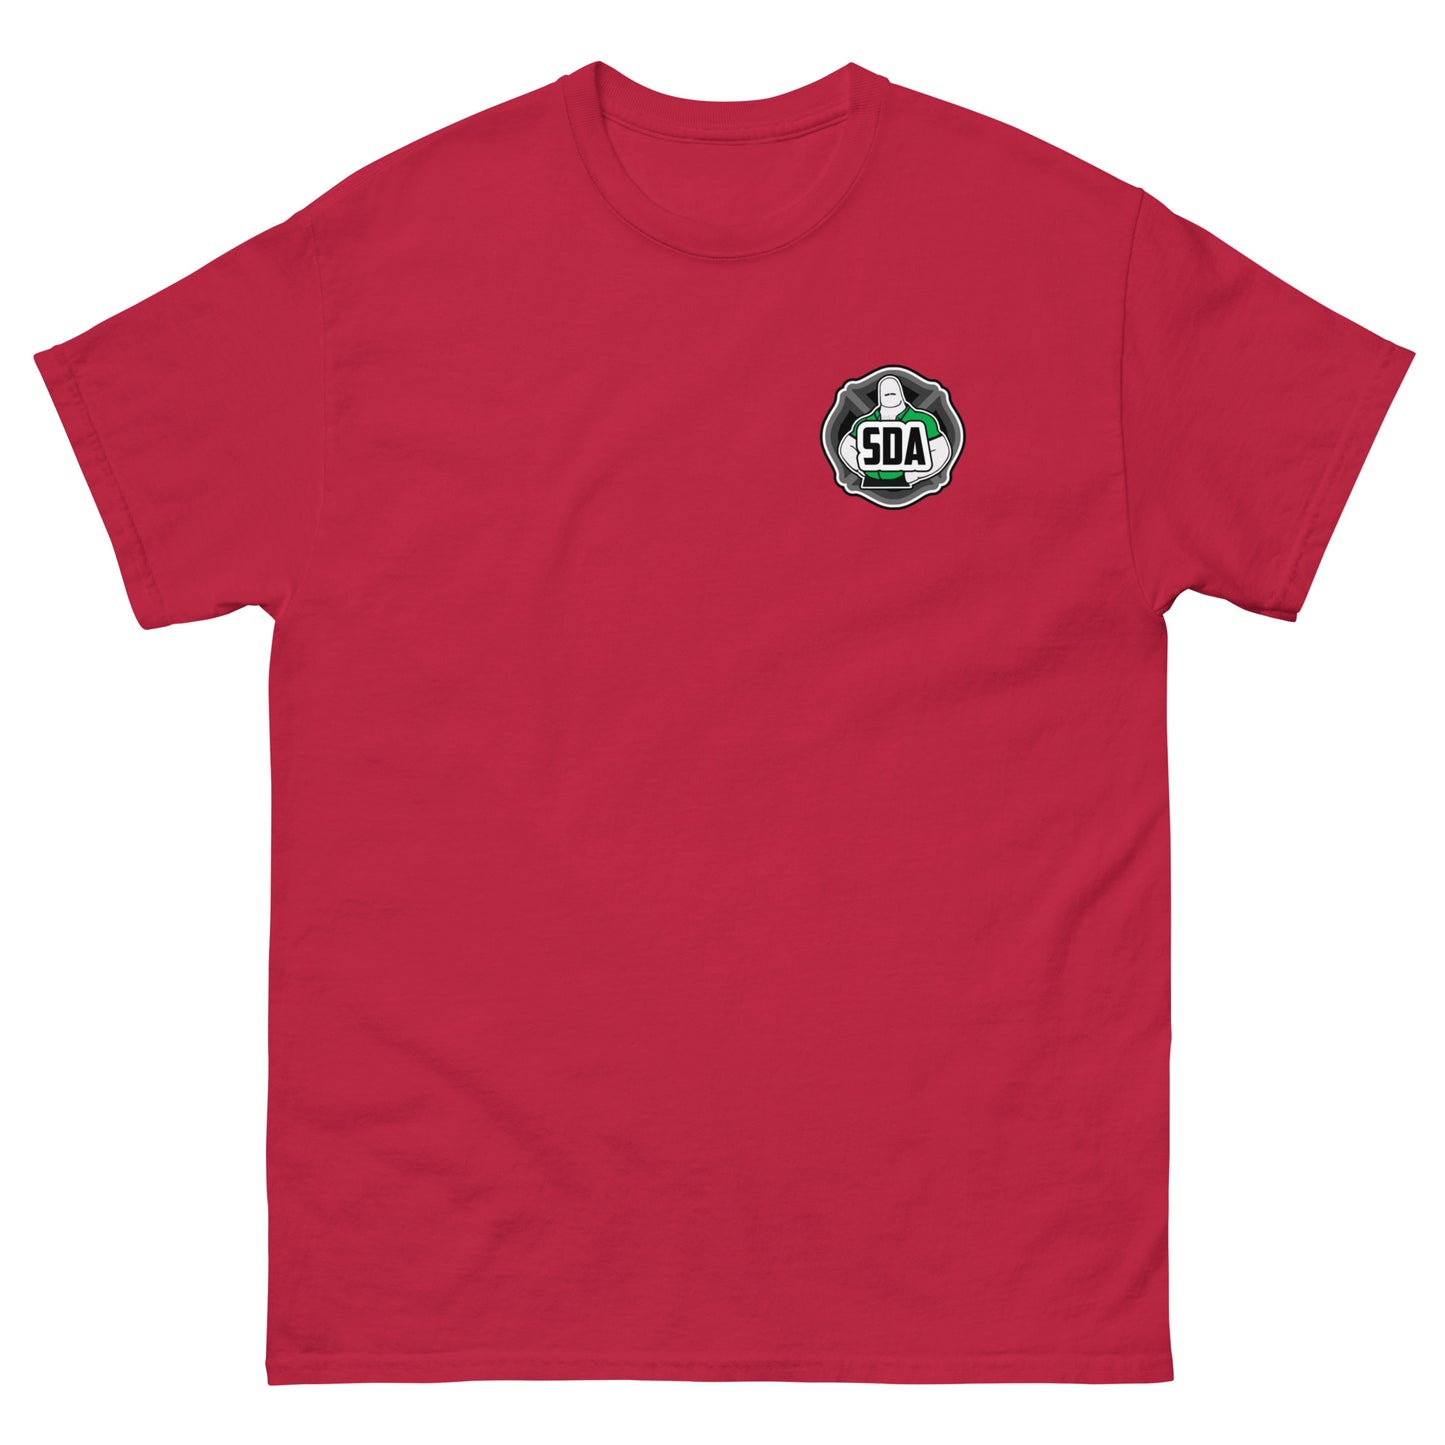 Support Volunteers Shield and Axes classic tee